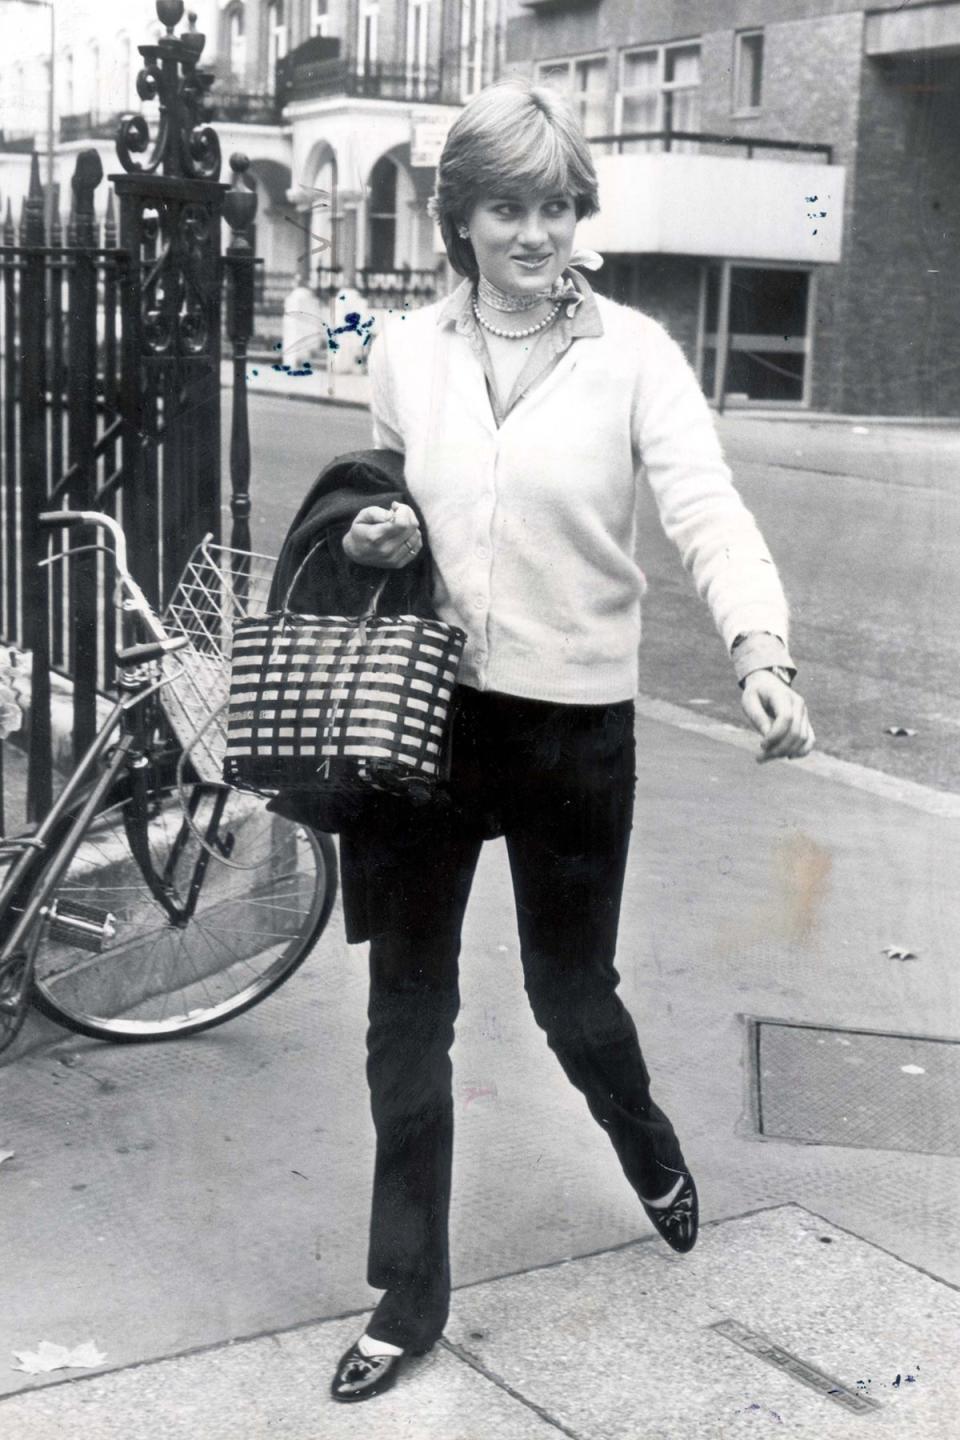 Lady Diana Spencer (Diana, Princess of Wales) leaving her flat in 1980 ( Neville Marriner/Associated Newspapers)